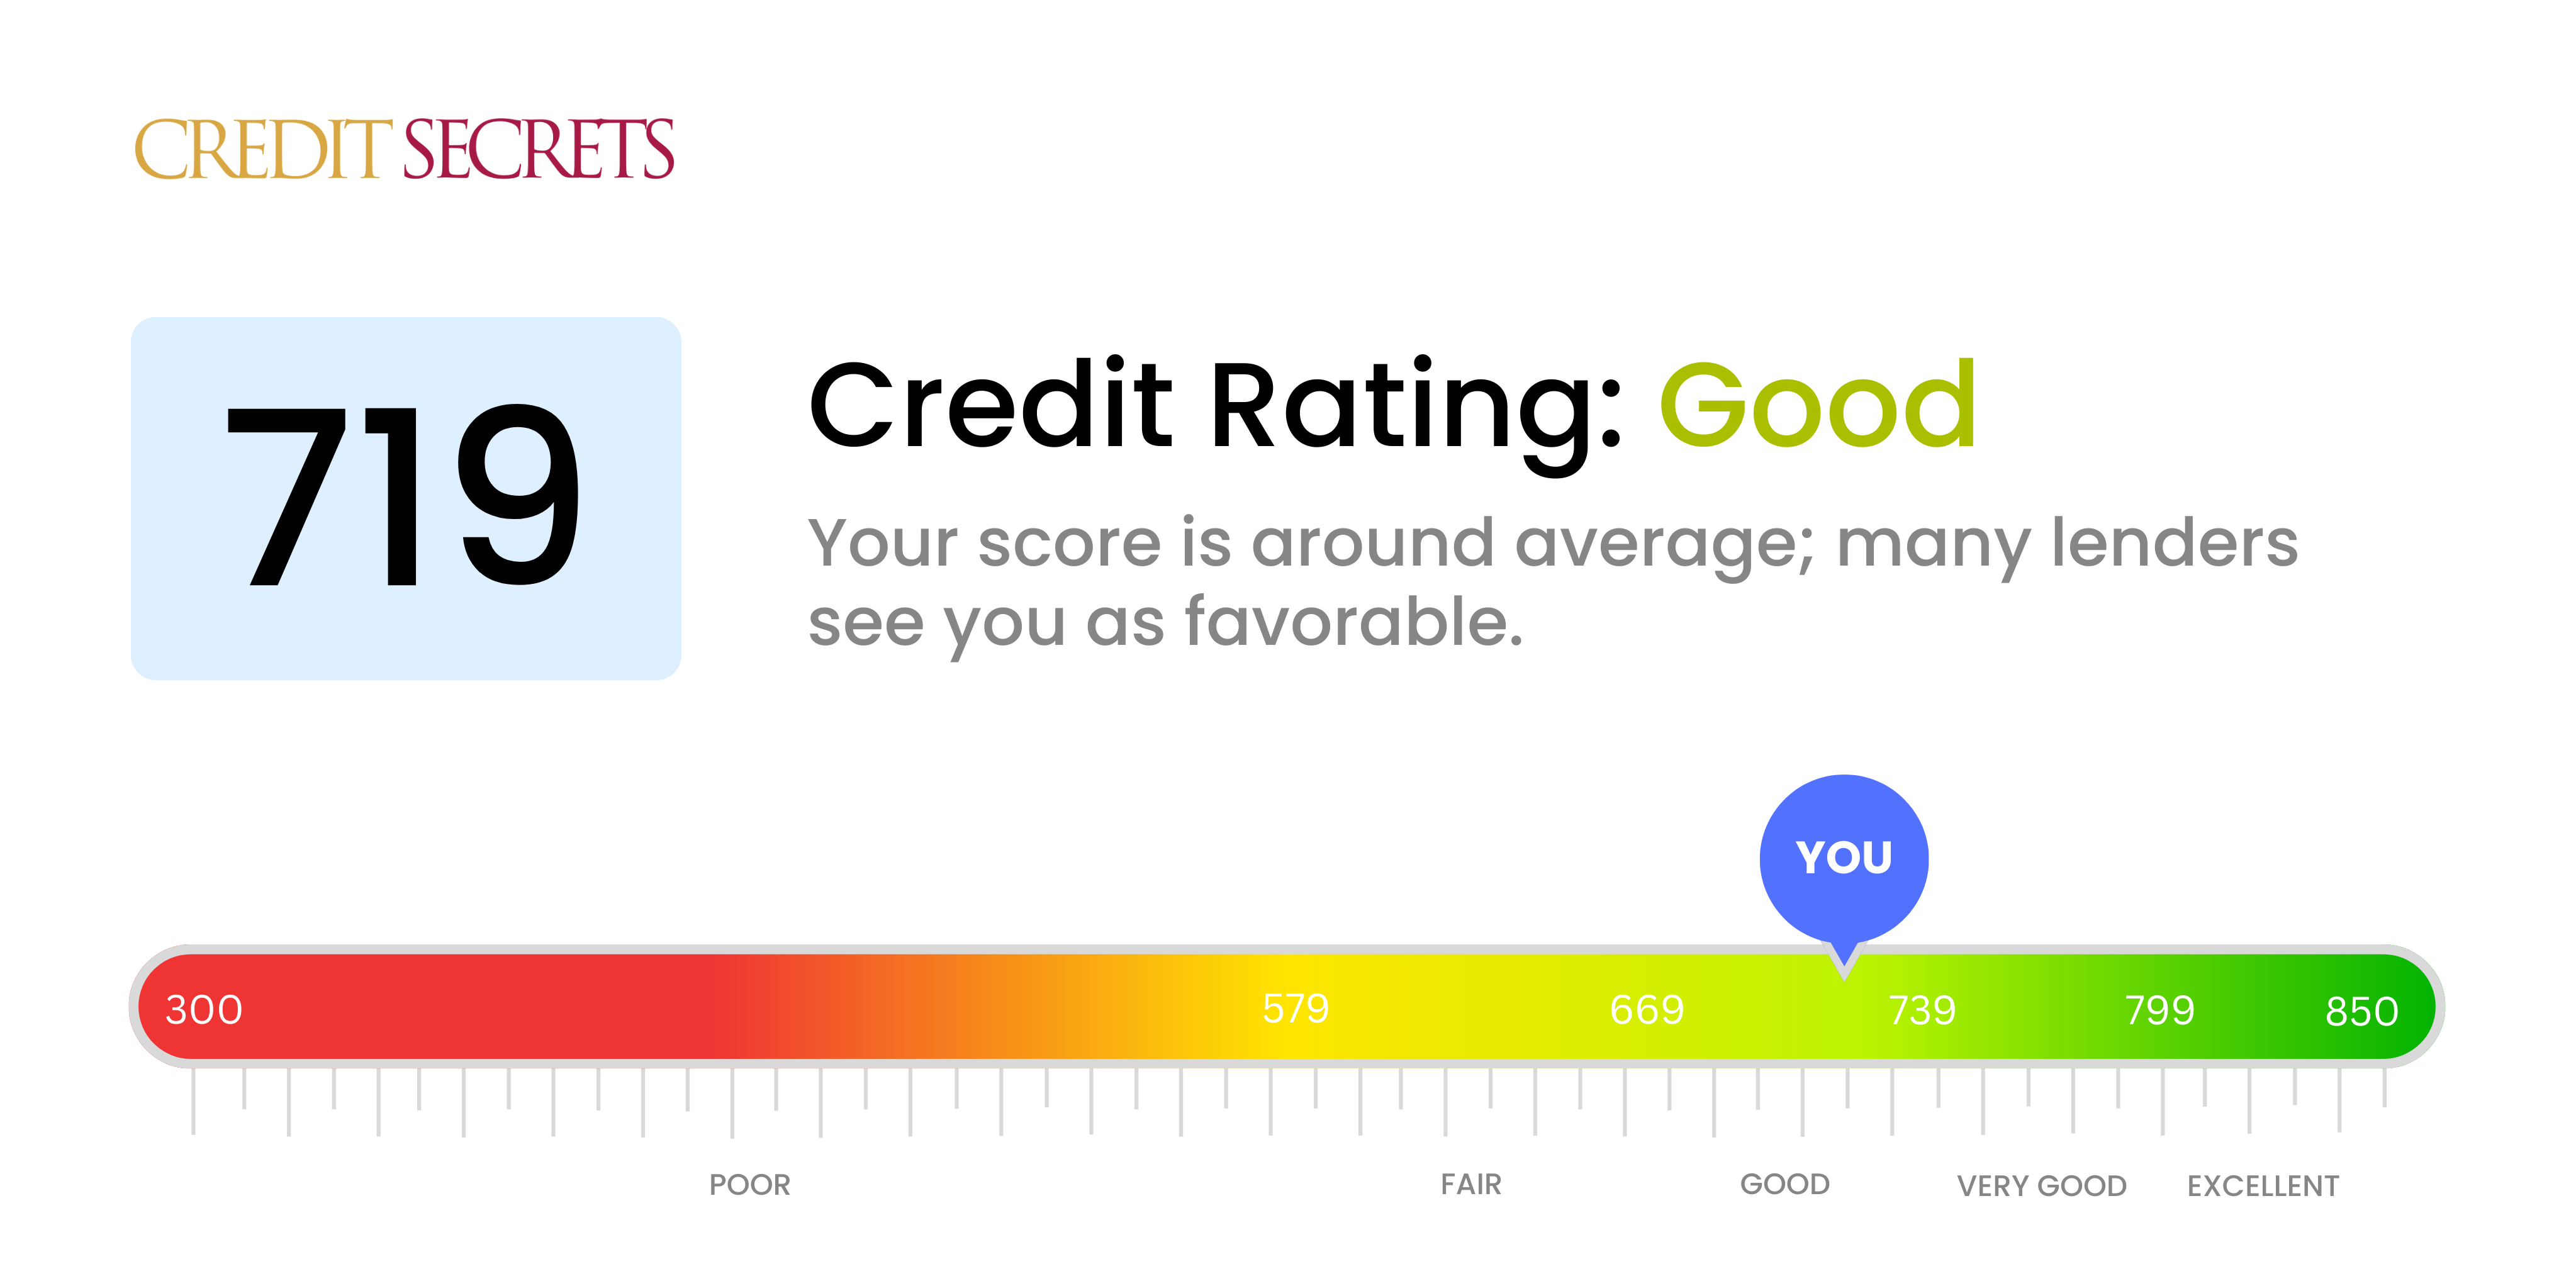 Is 719 a good credit score?